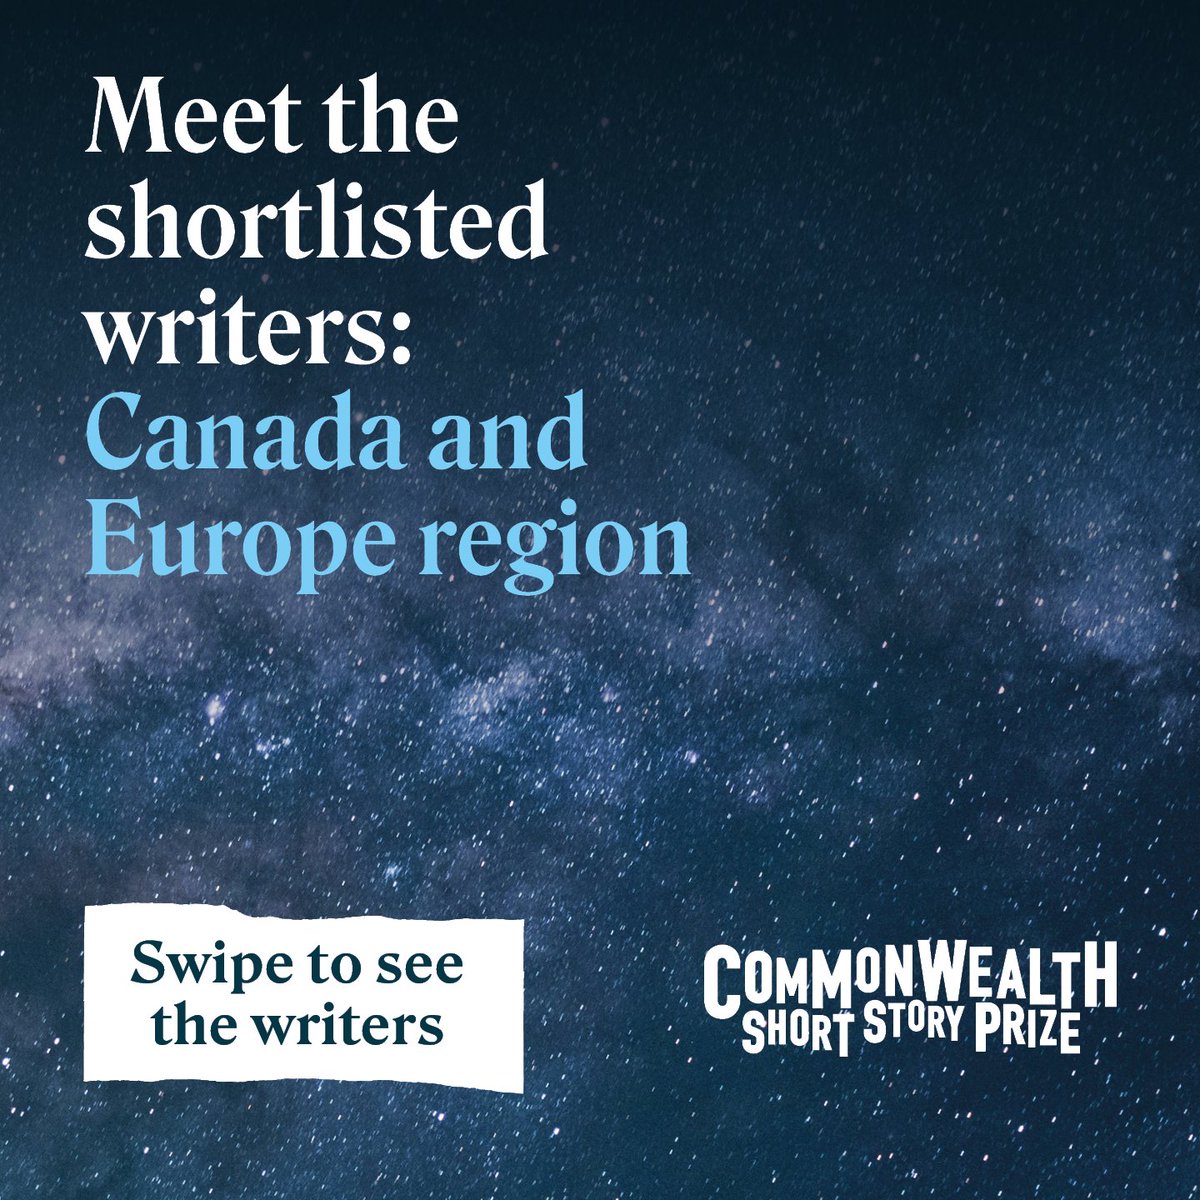 This year, the #CWprize shortlist for Canada and Europe is made up entirely of Canadians!

Learn more about the writers 👇